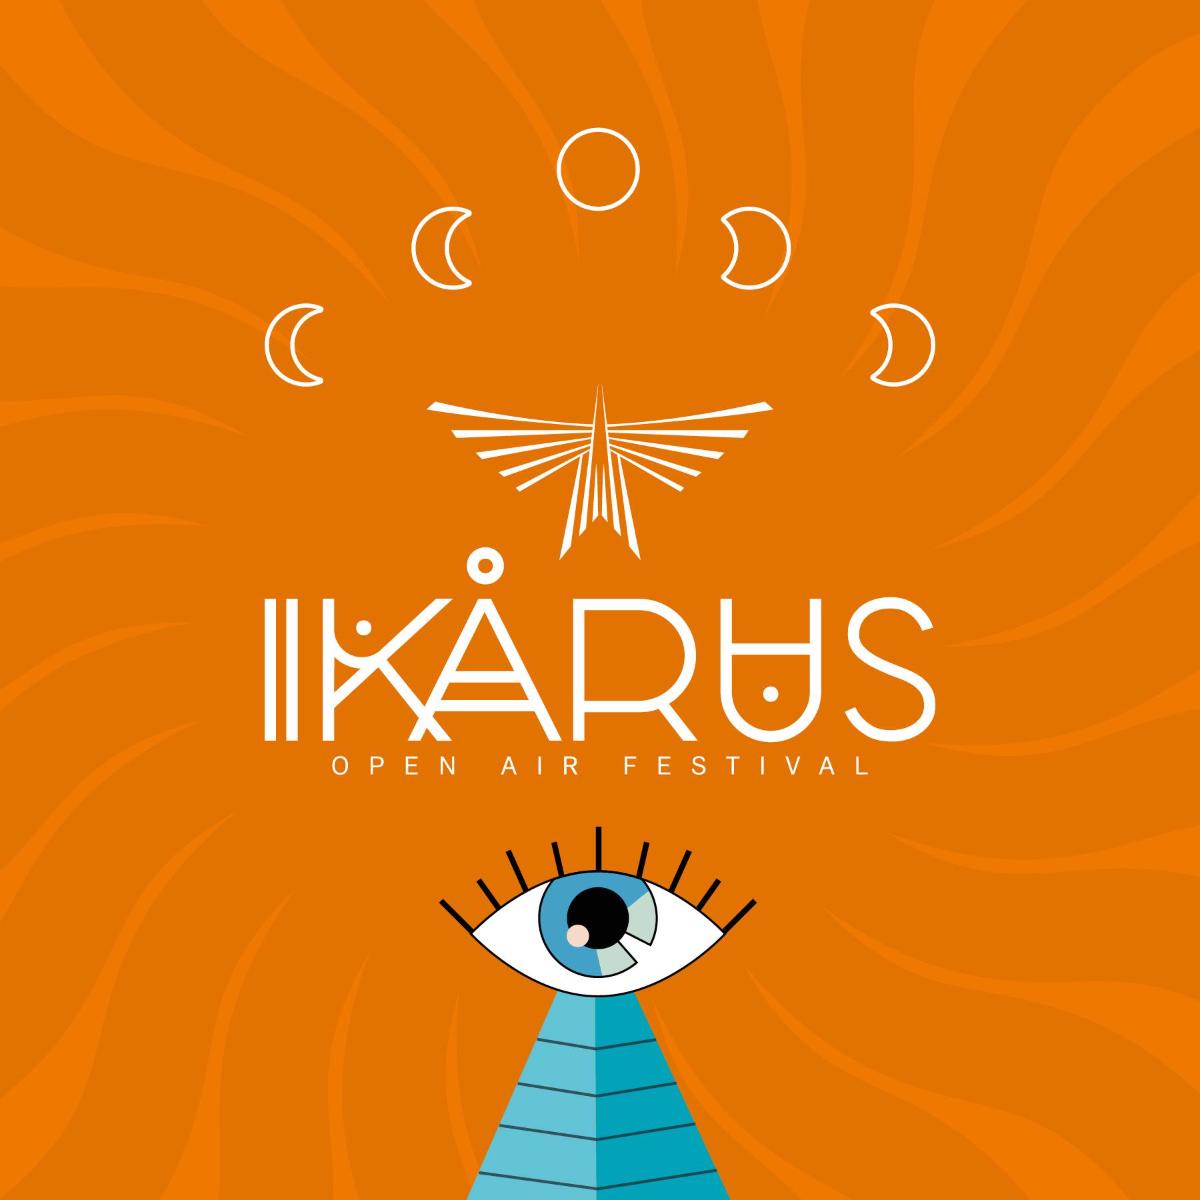 Ikarus Festival Festival Lineup, Dates and Location